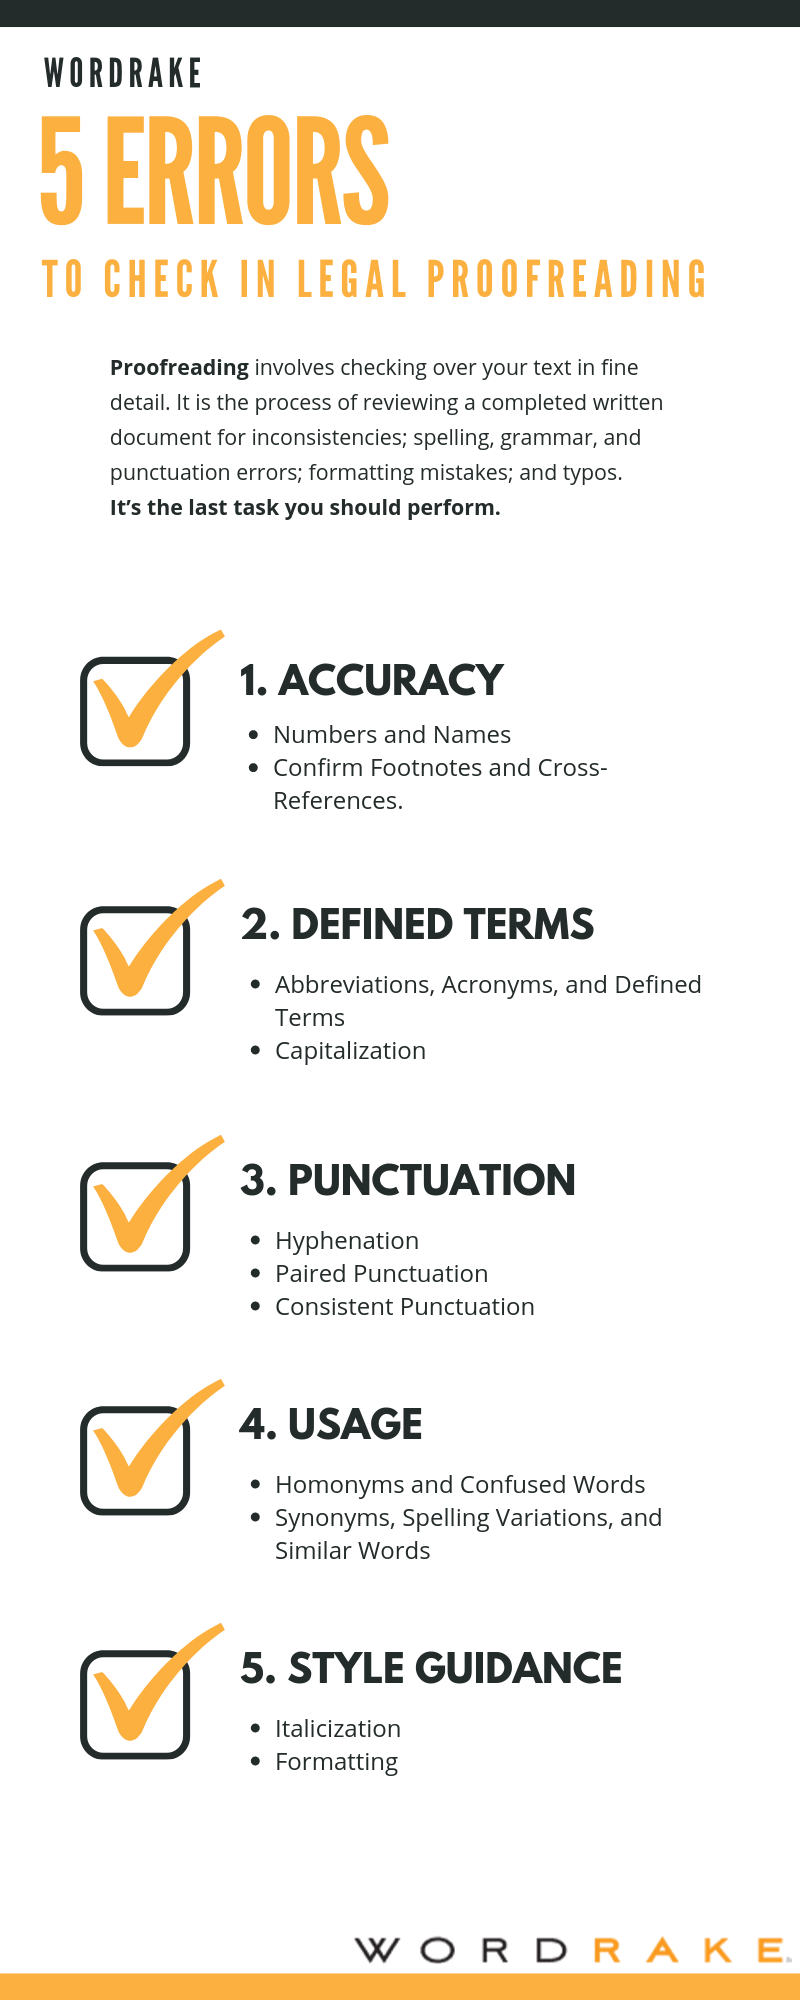 Checklist_5 Errors to Check in Legal Proofreading (Long)